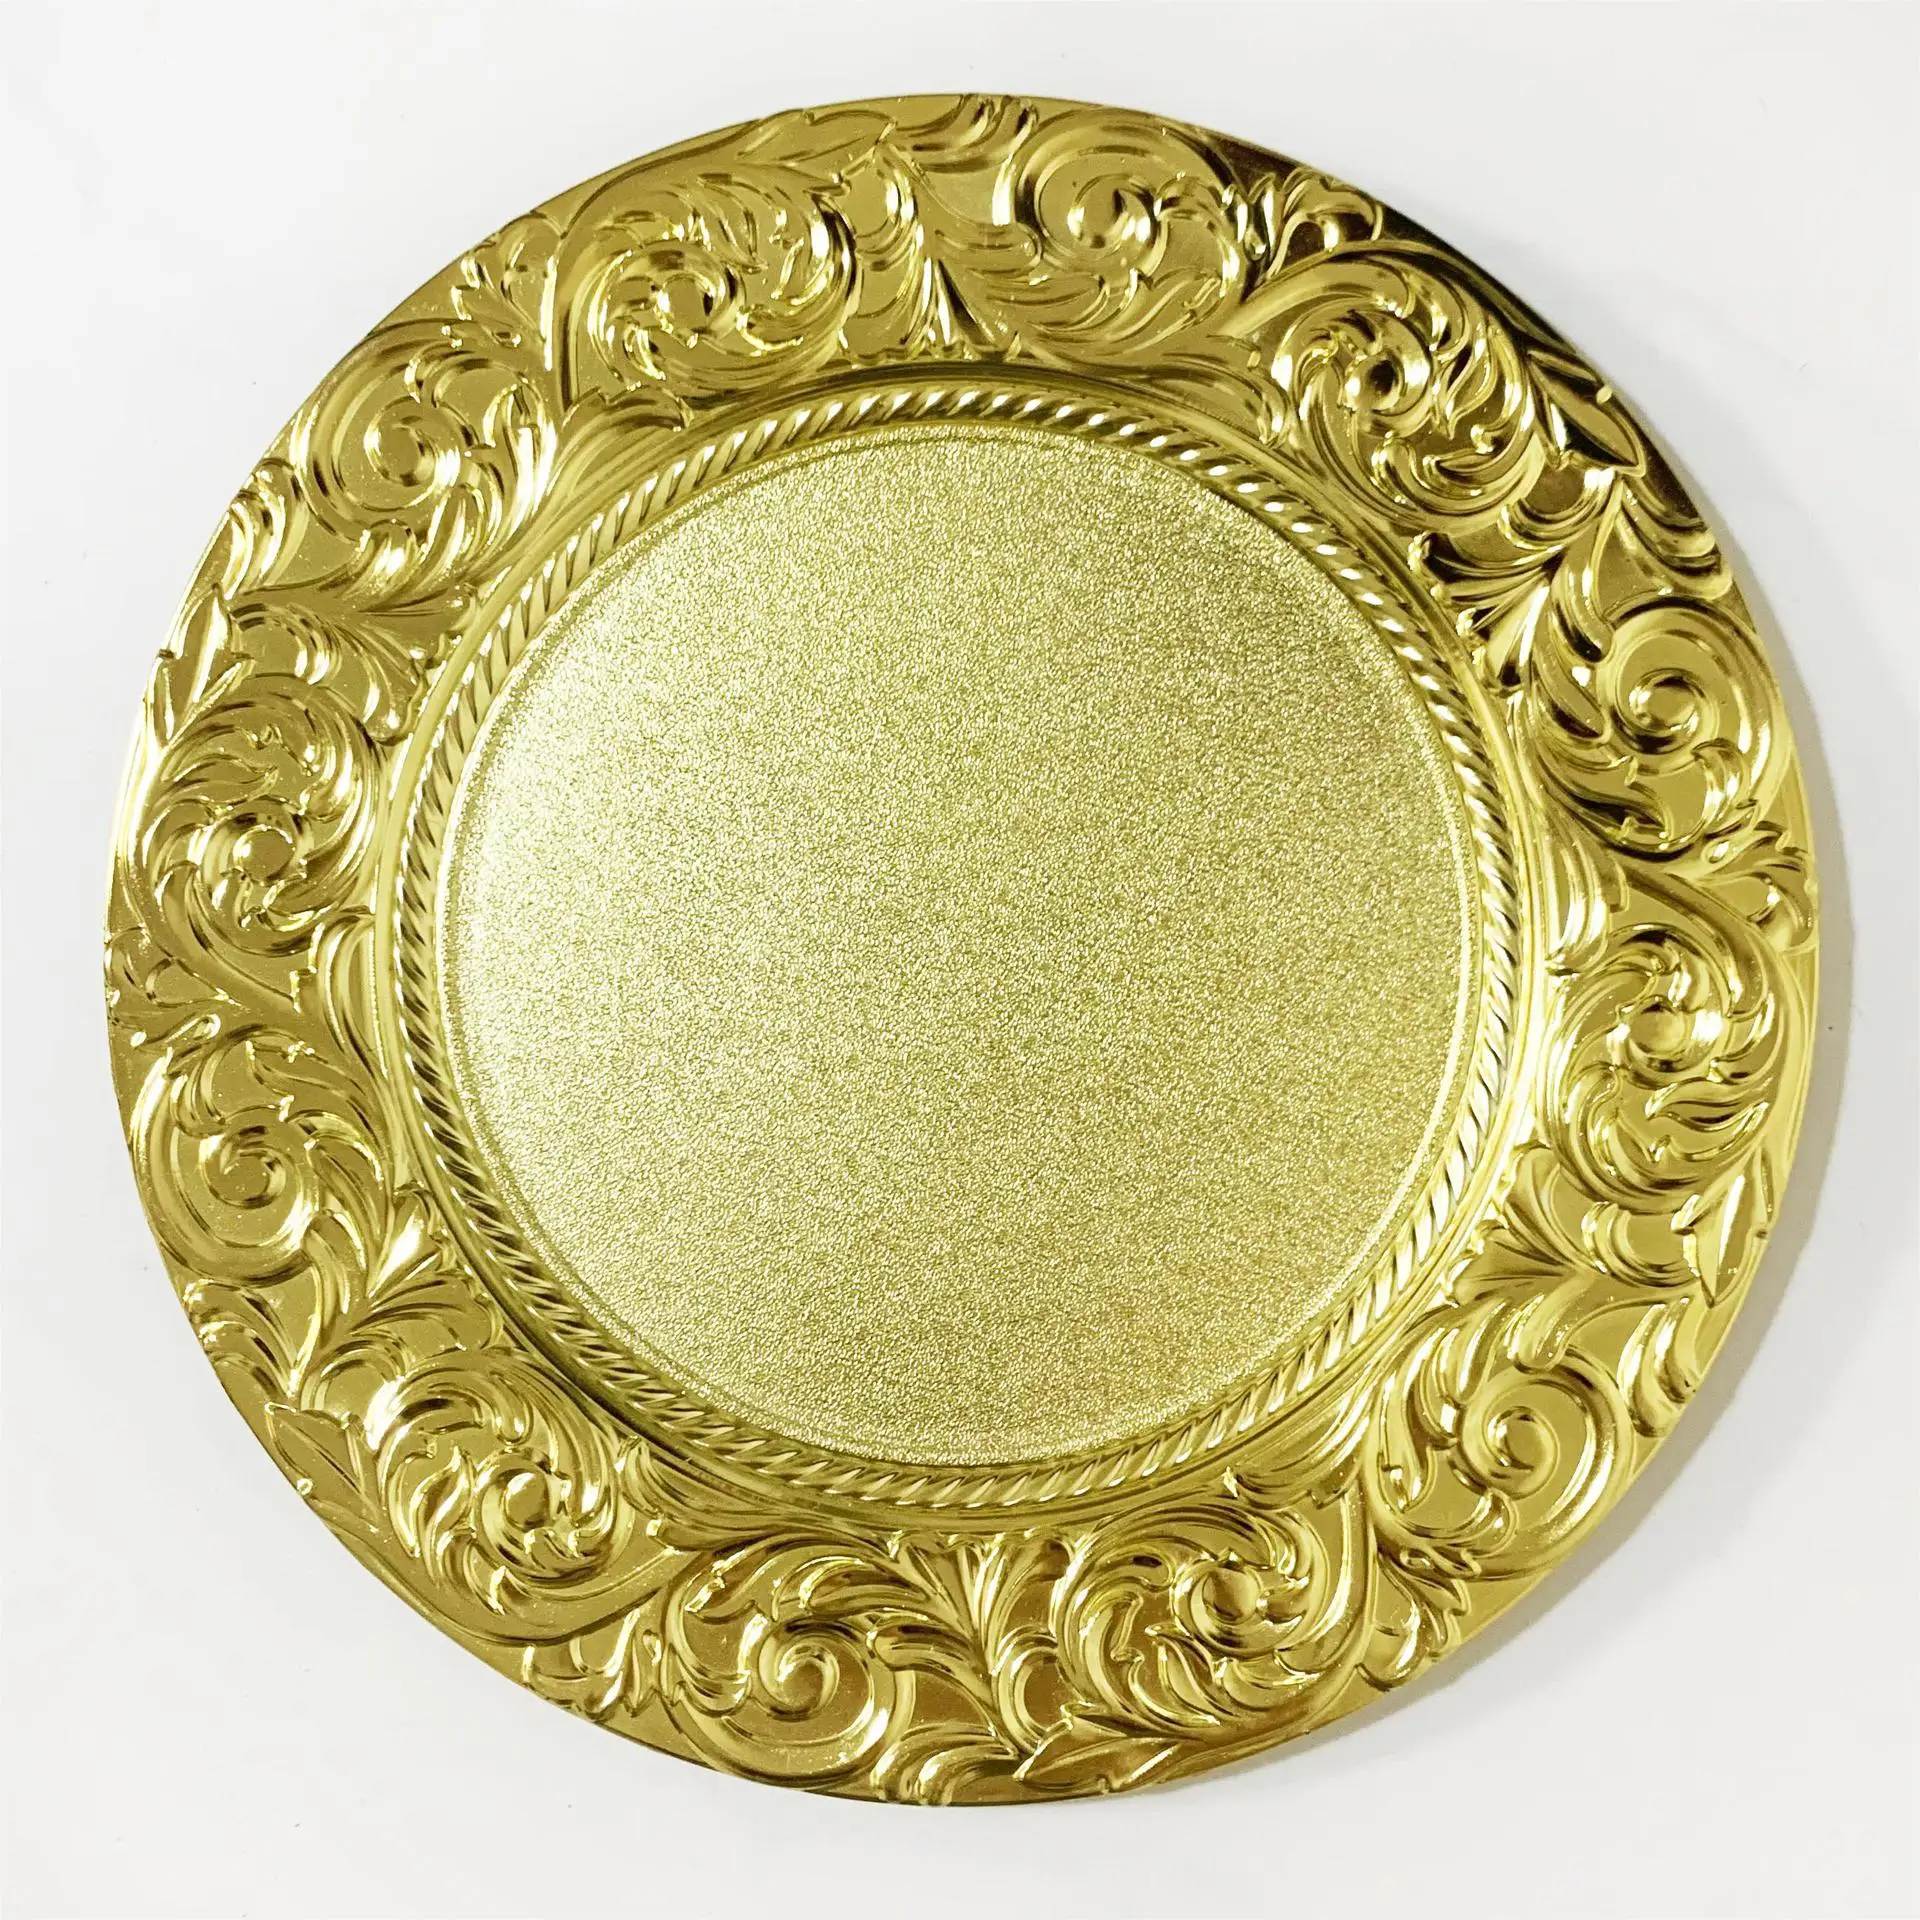 

100PCS Gold Charger Plate Plastic Decorative Service Plate Party Dinner Serving Tray Wedding Christmas Banquet Table Organizer